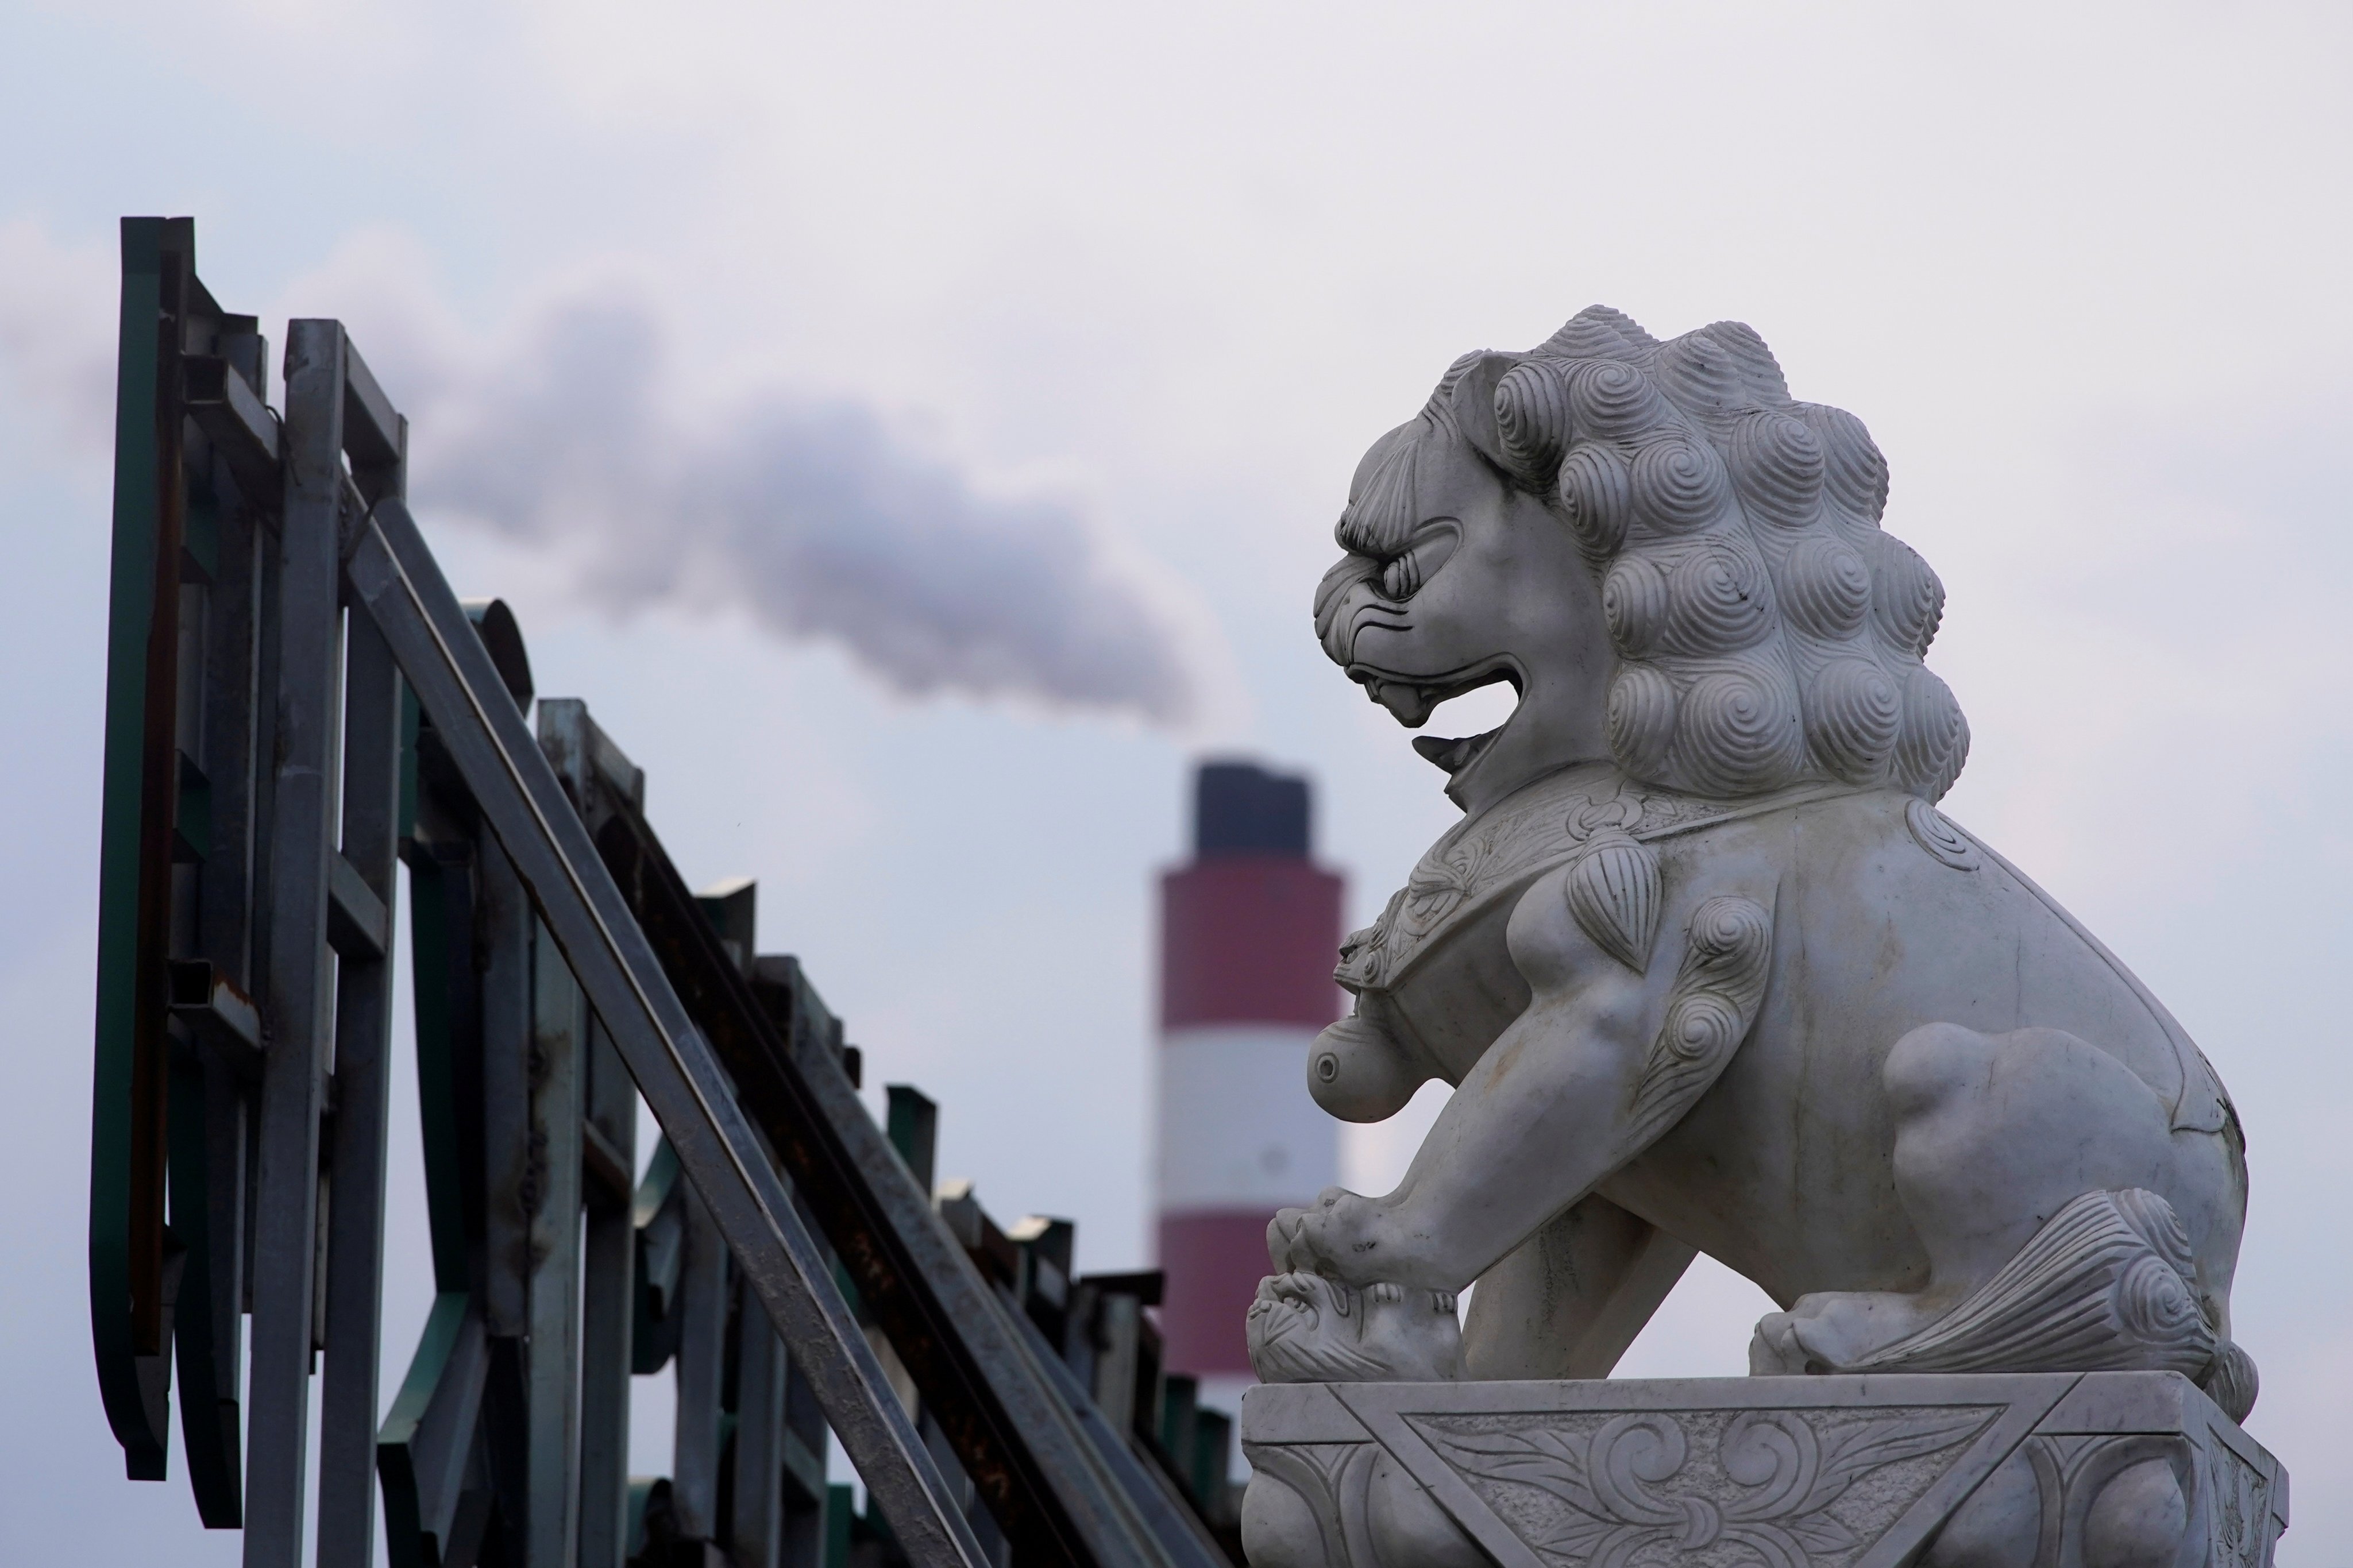 The chimney of a coal-fired power plant stands behind a lion statue in Shanghai on October 21, 2021. Photo: Reuters